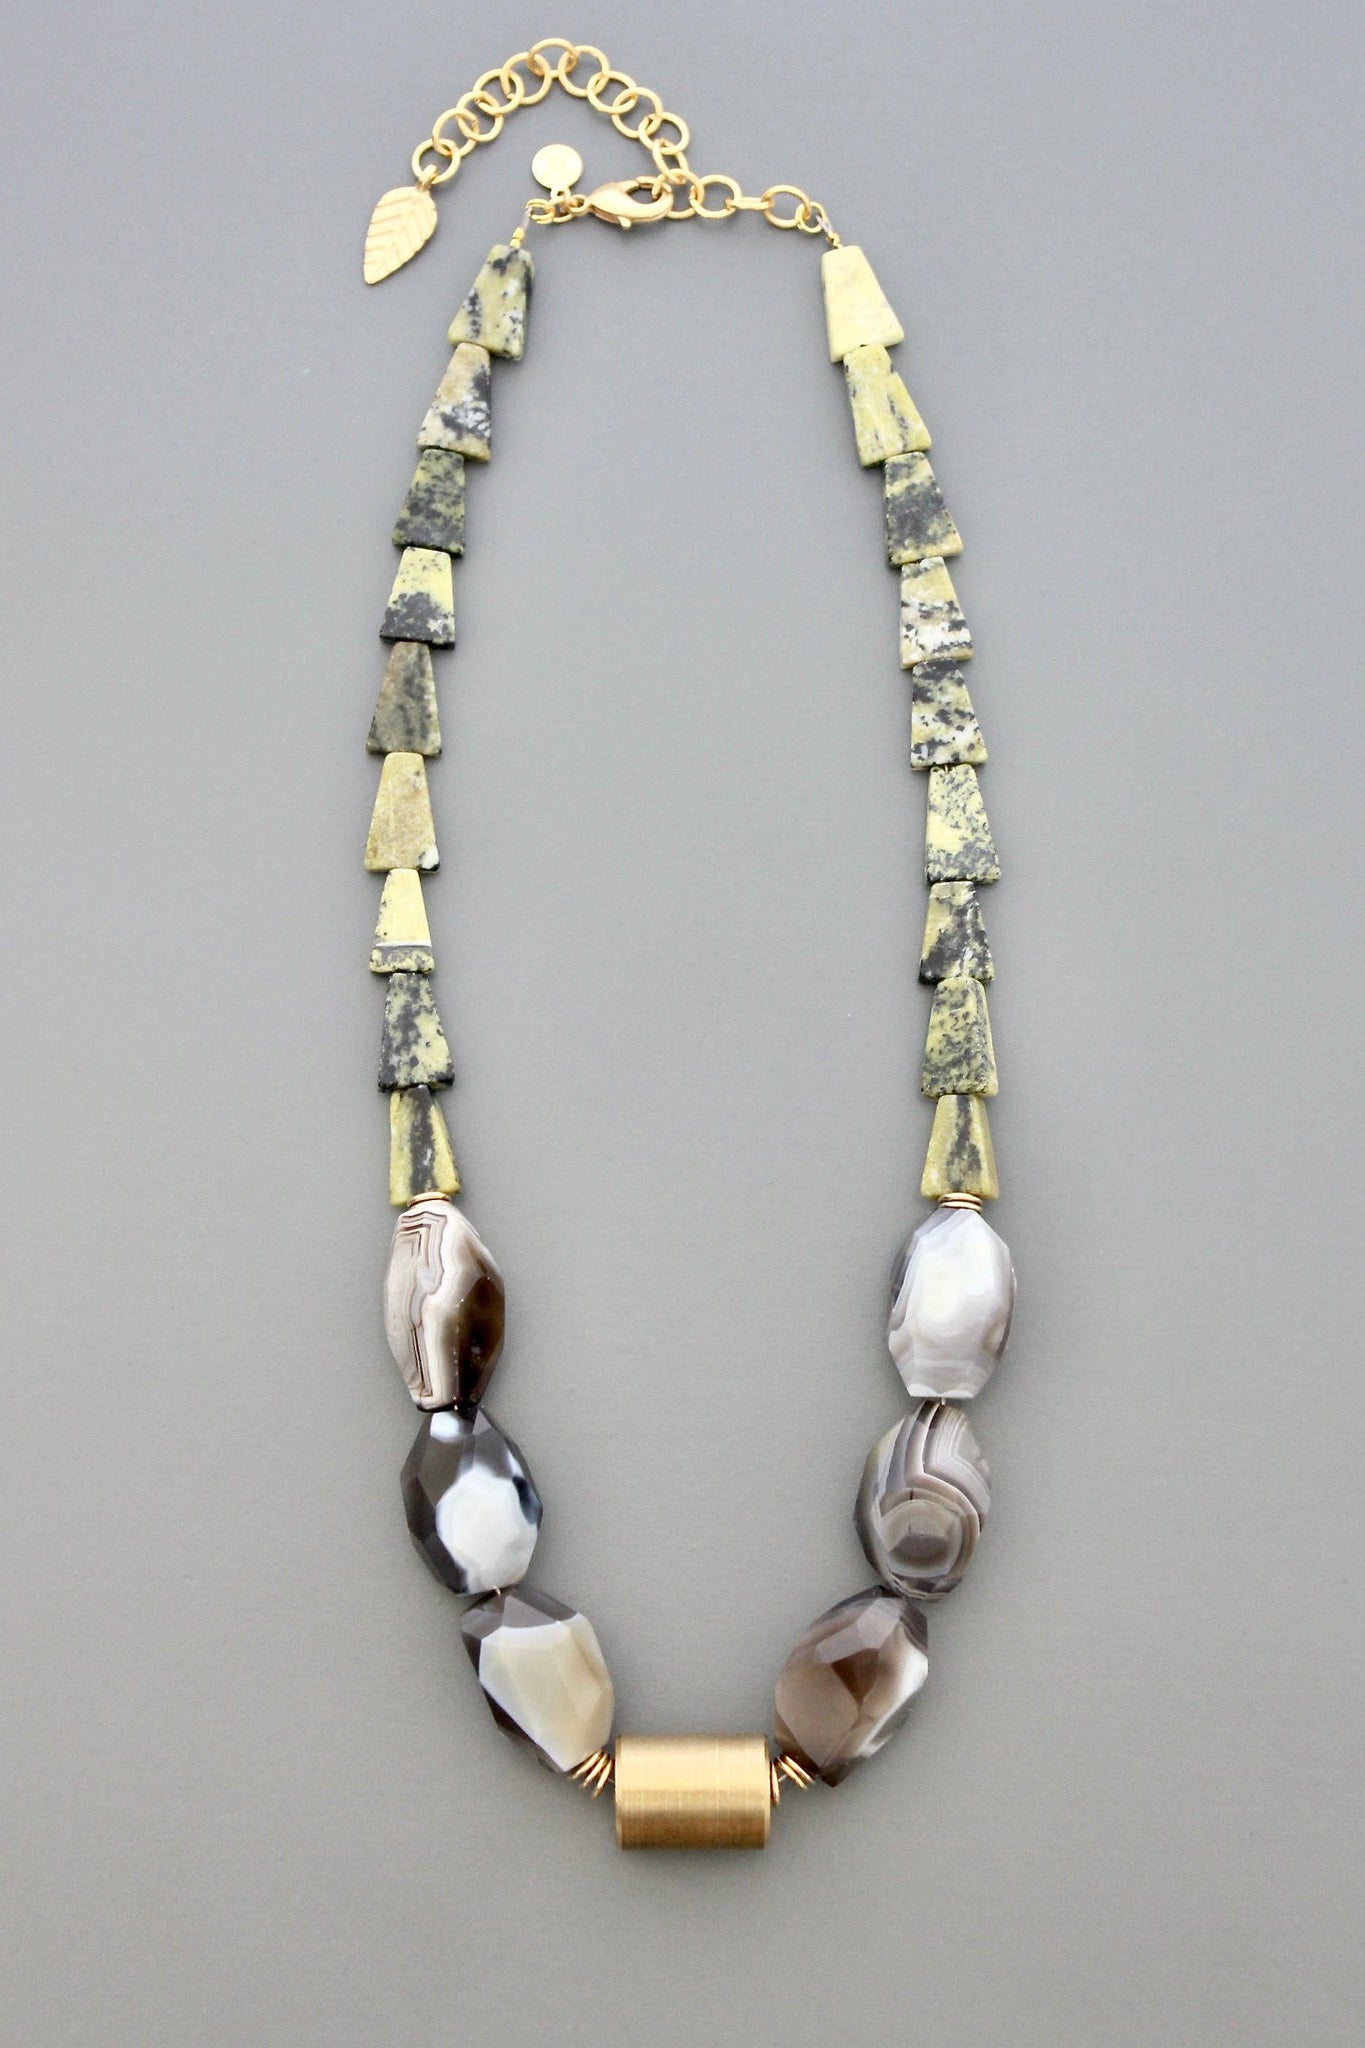 Agate and serpentine necklace